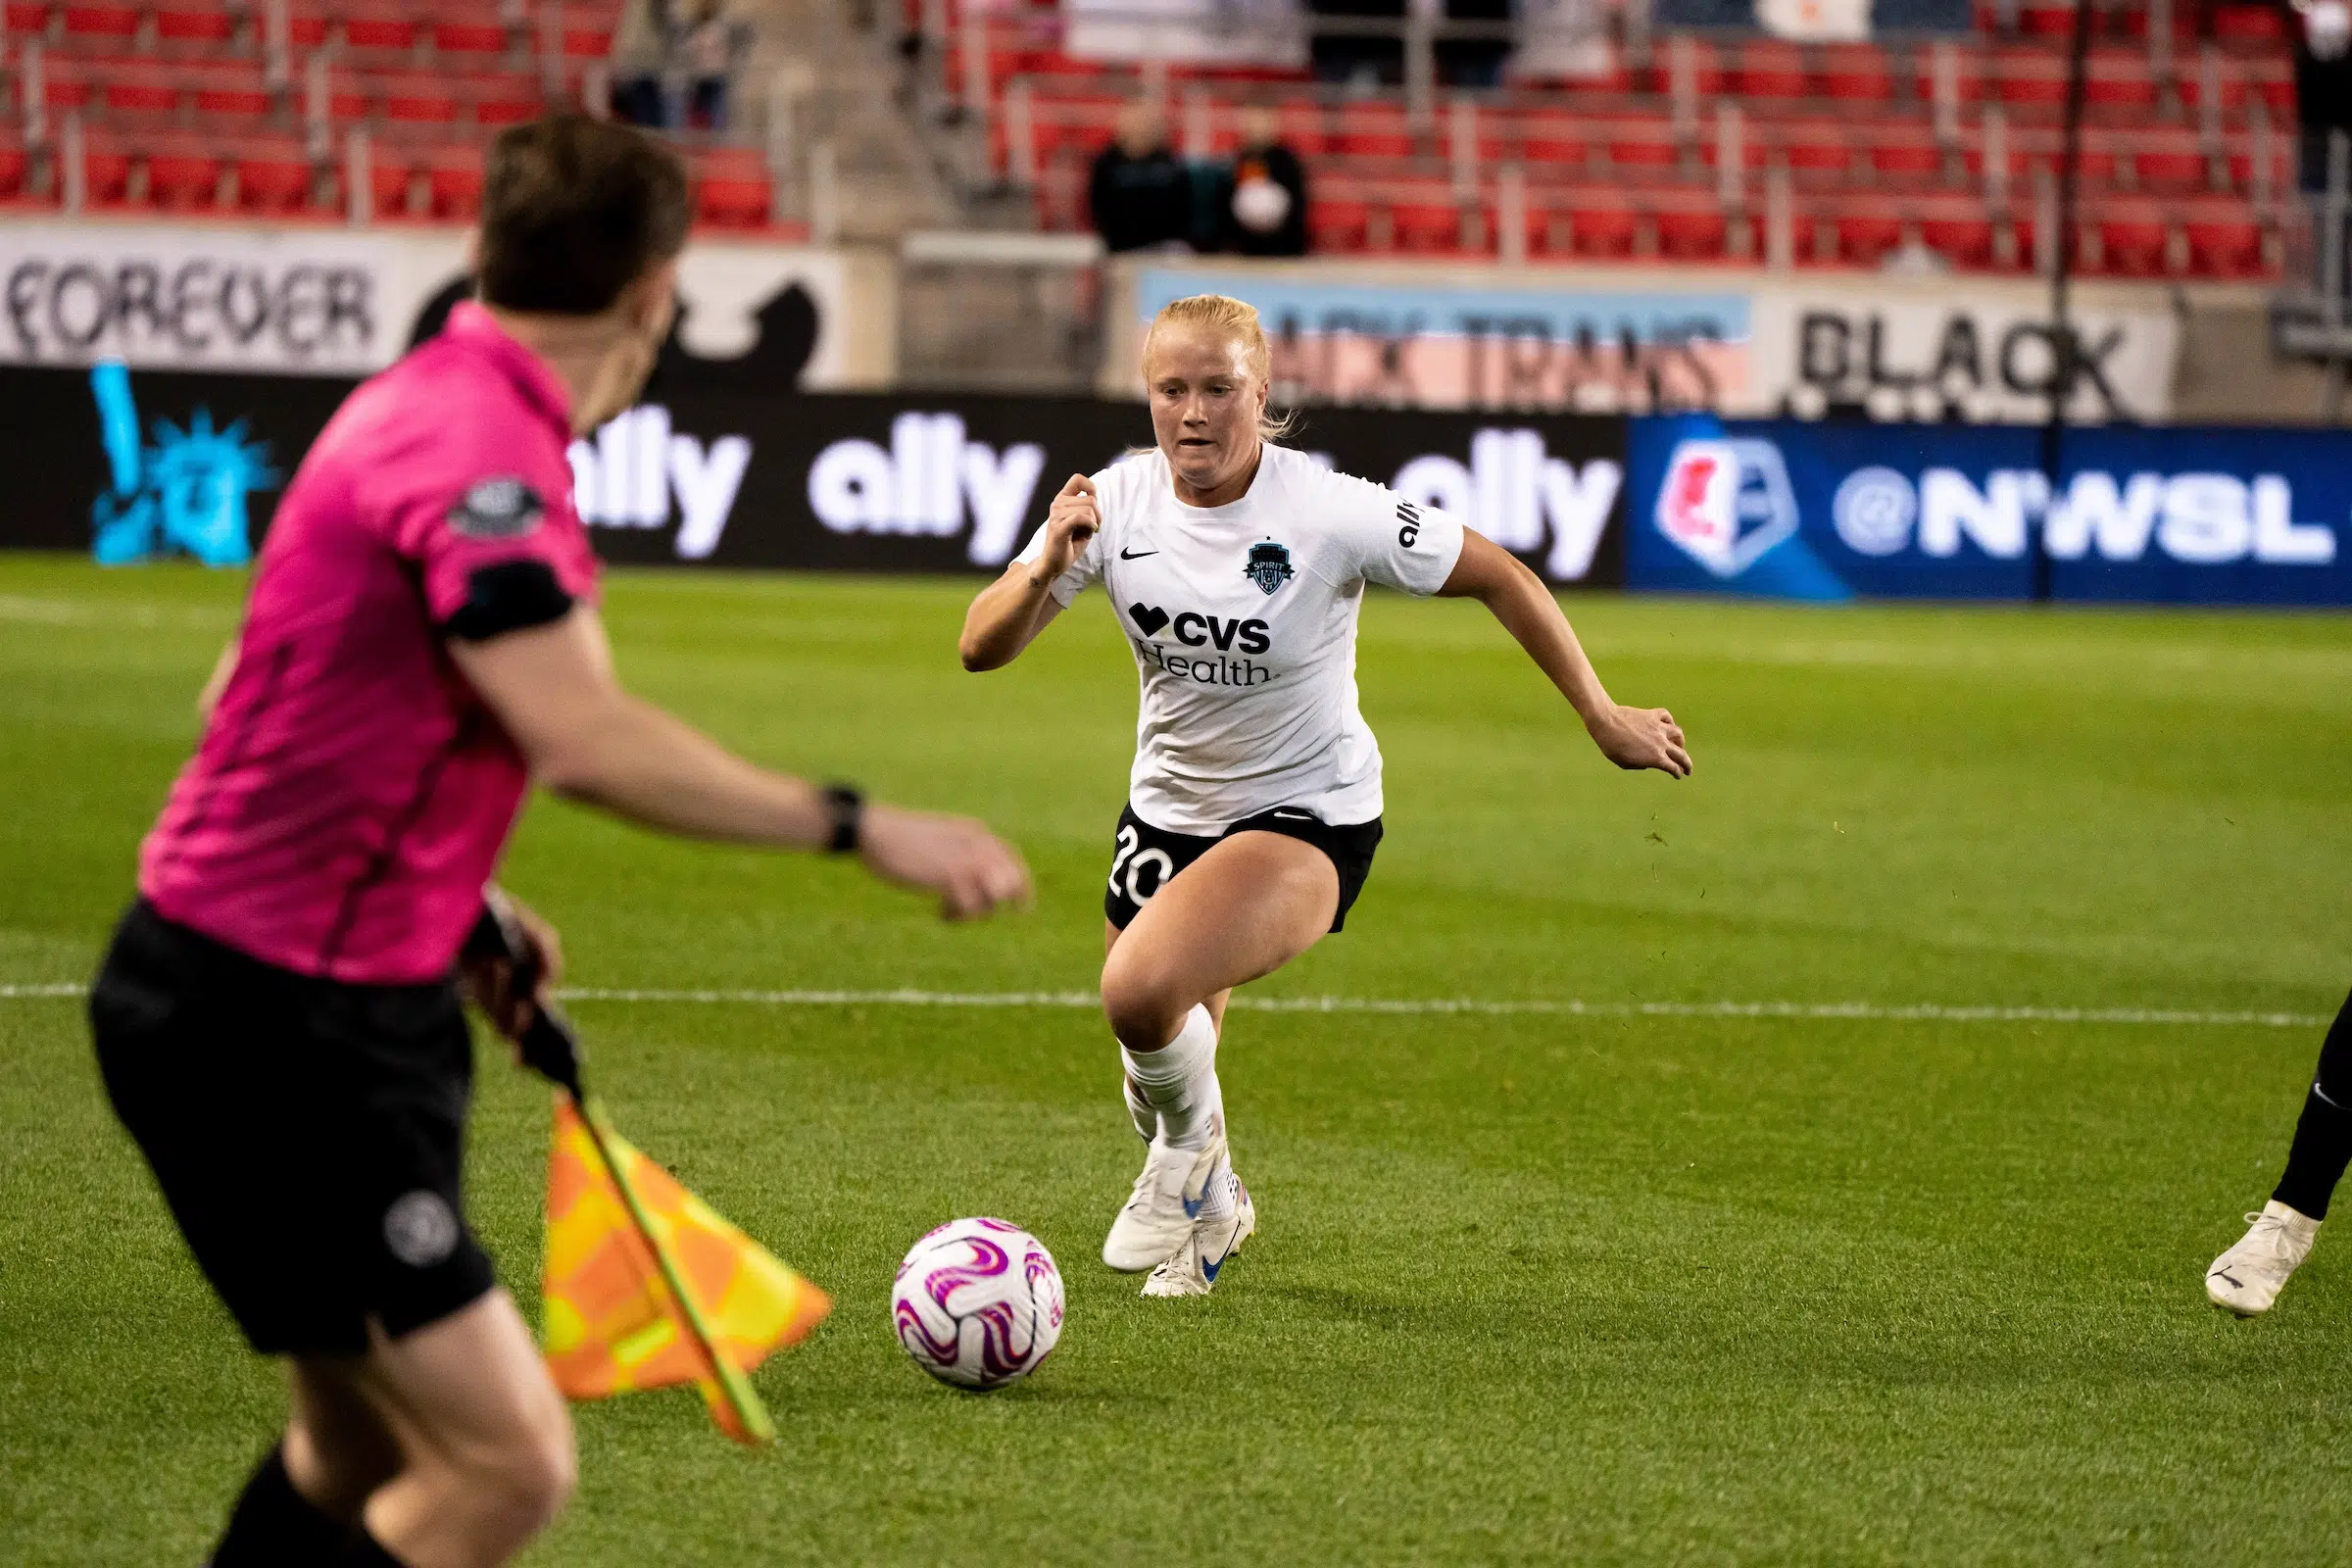 Civana Kuhlmann dribbles a soccer ball. In the foreground, a soccer referee in a pink shirt is out of focus.